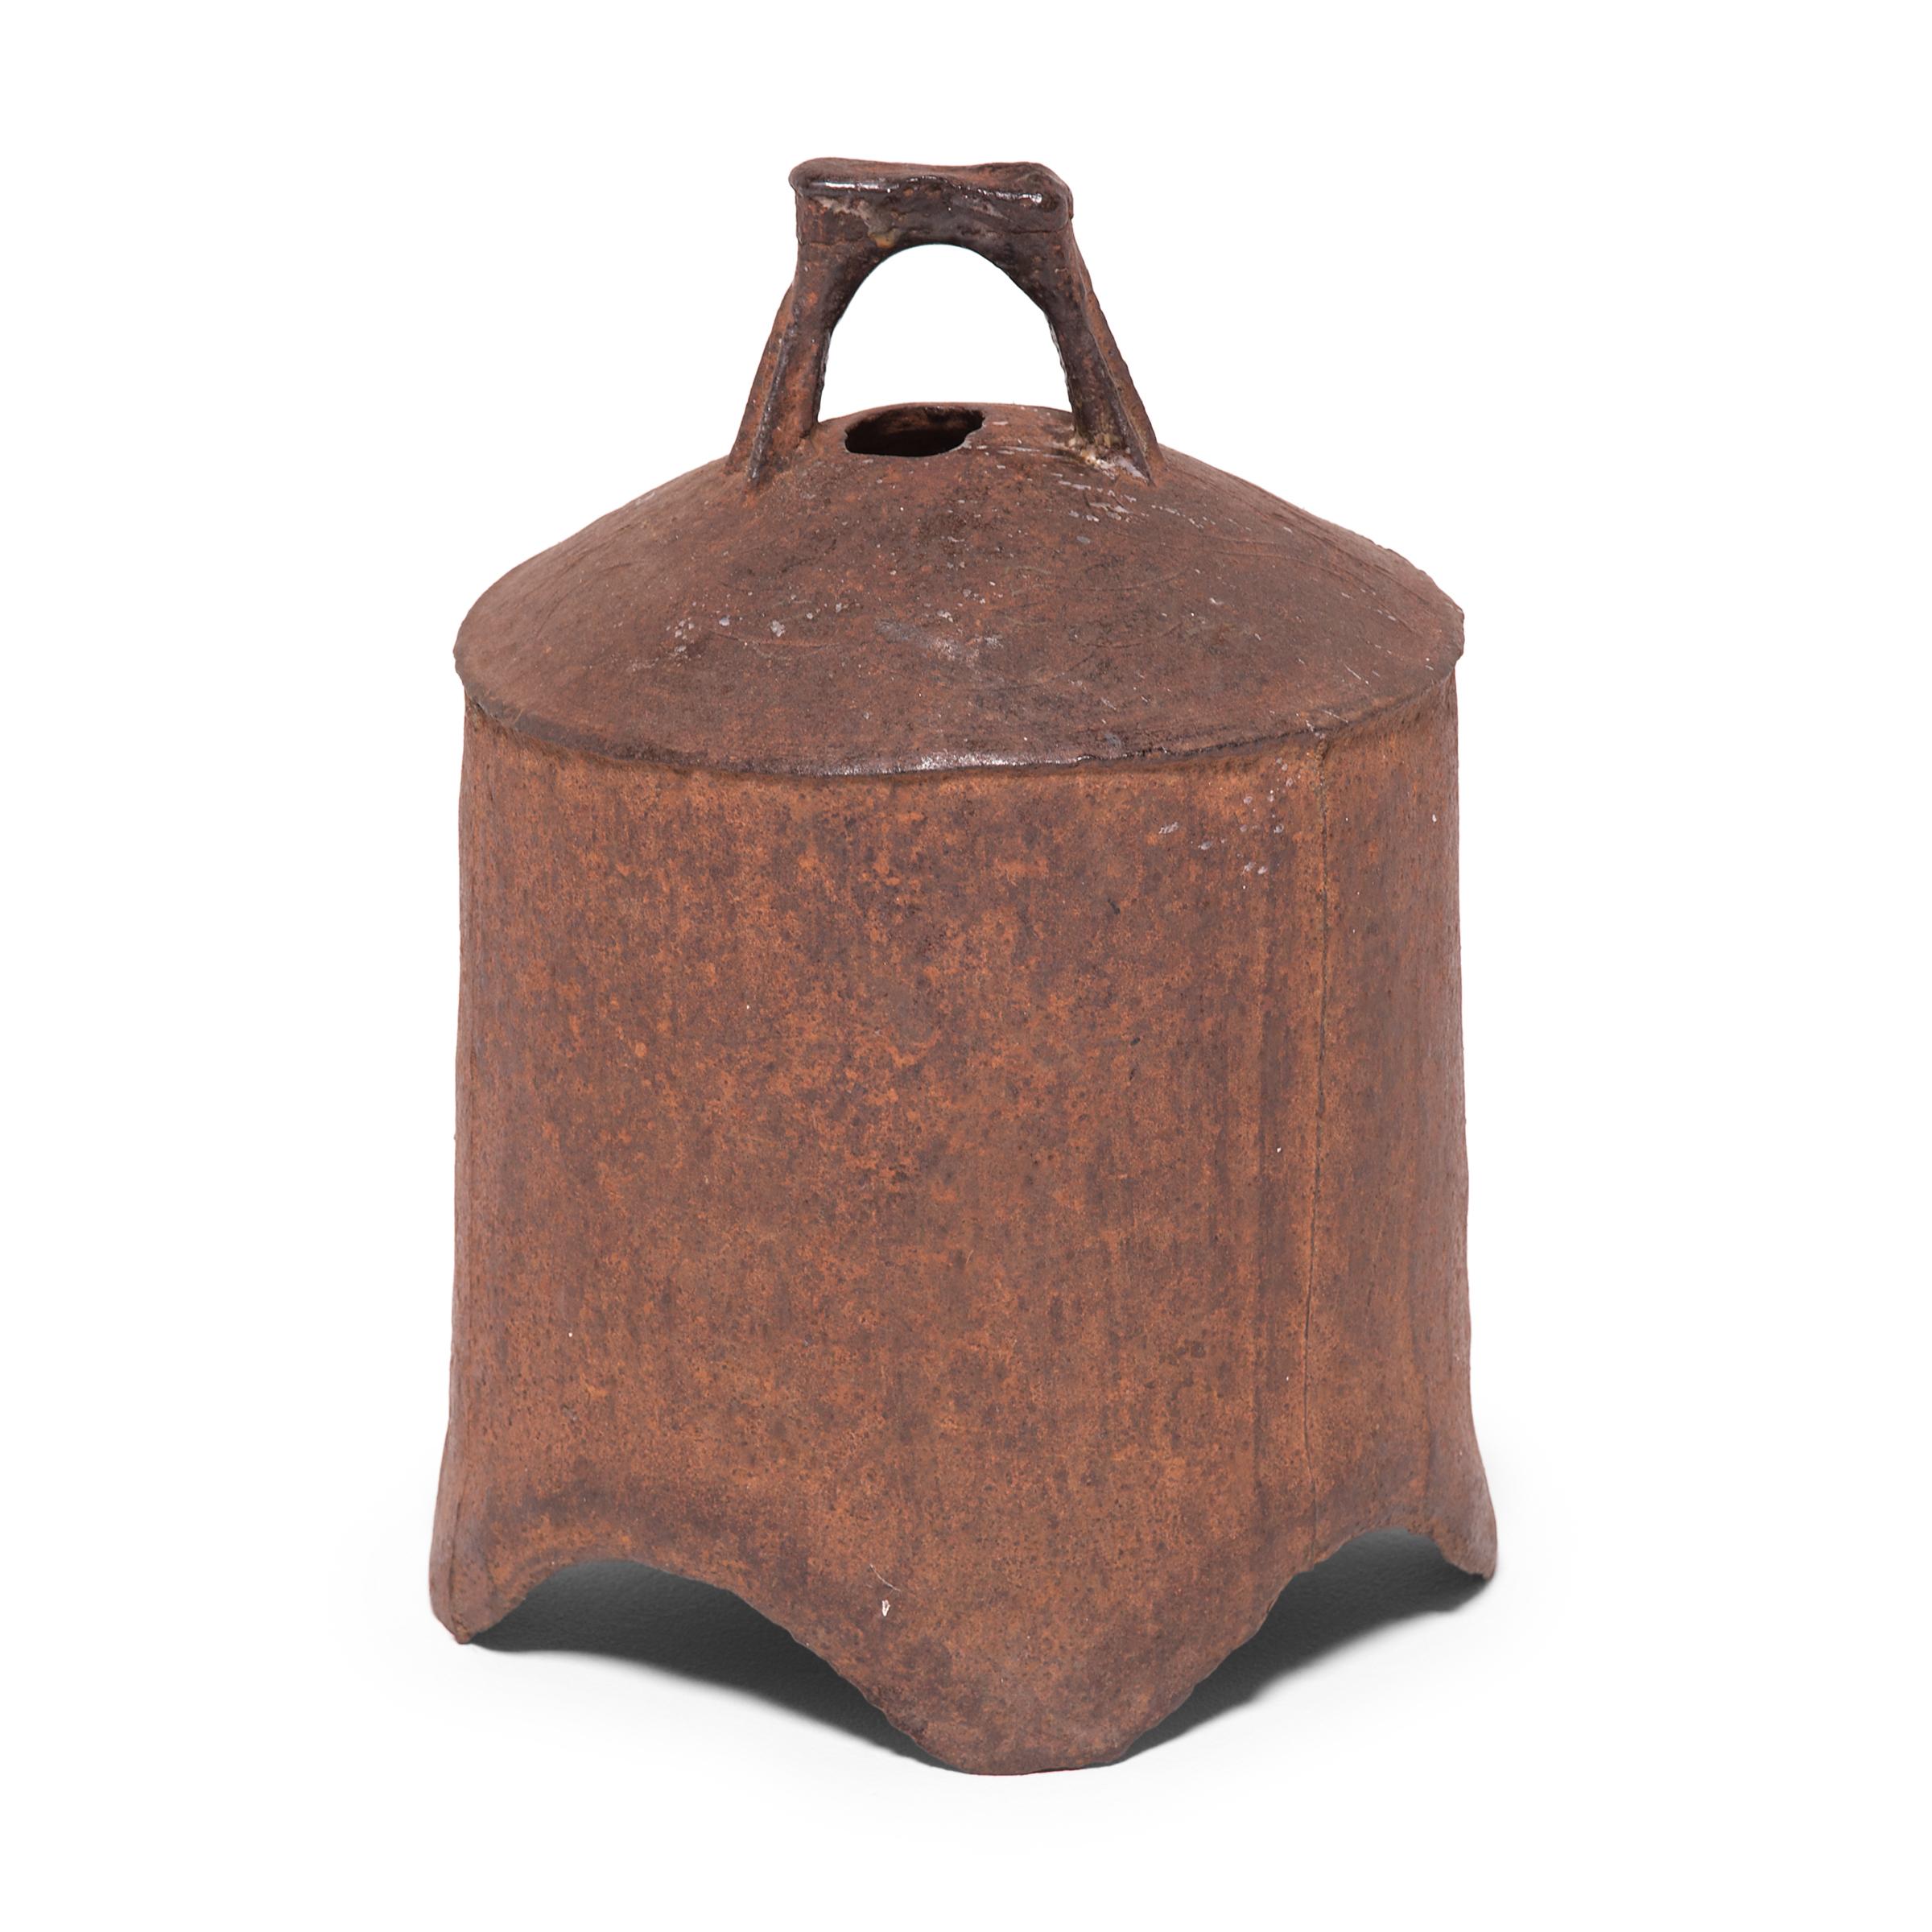 This rustic, 19th century iron bell once pealed in celebration or gave notice of important events in a town in Northern China. The shoulder of the bell is decorated with subtle linework in low relief for added texture. Marked with holes to affix a